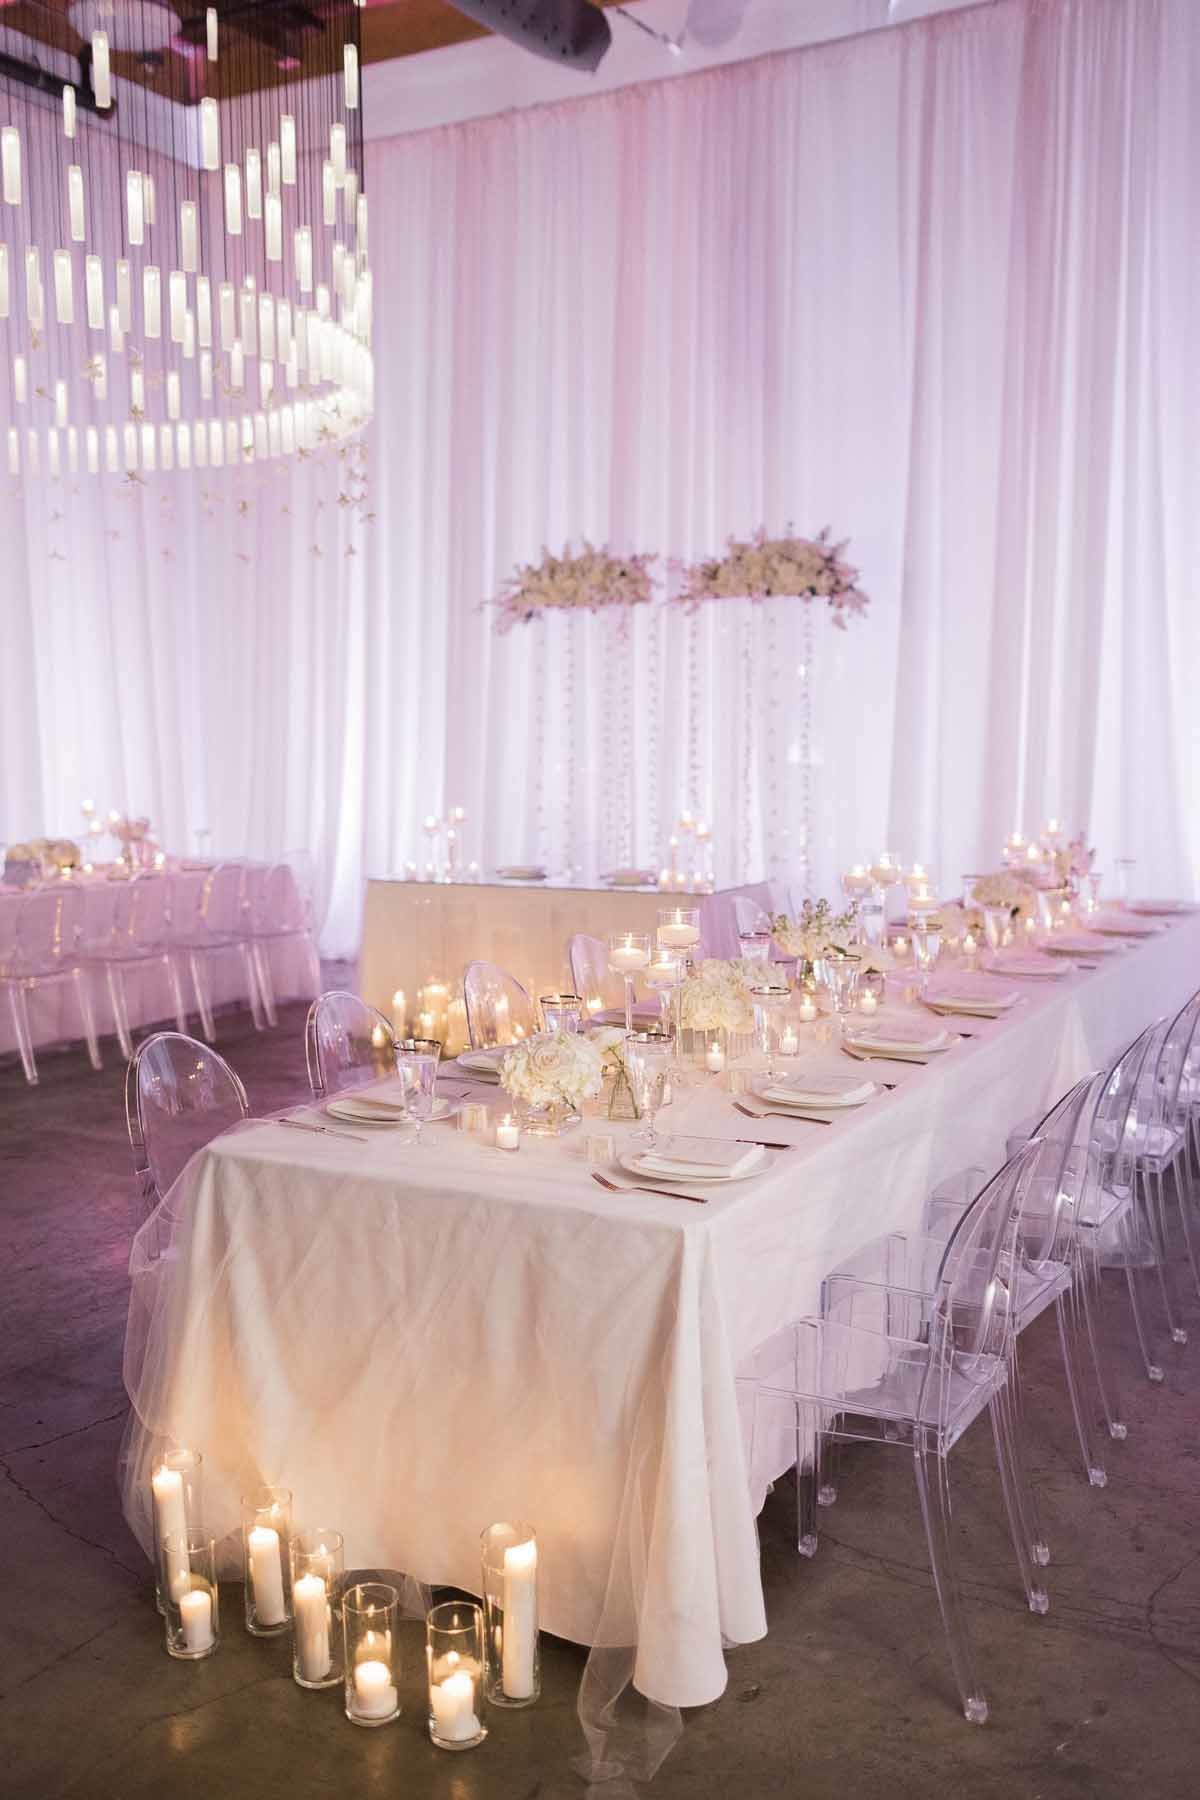 All white wedding with white draping, white linens, white flowers, and lots of candles at Canva Event Space in Seattle